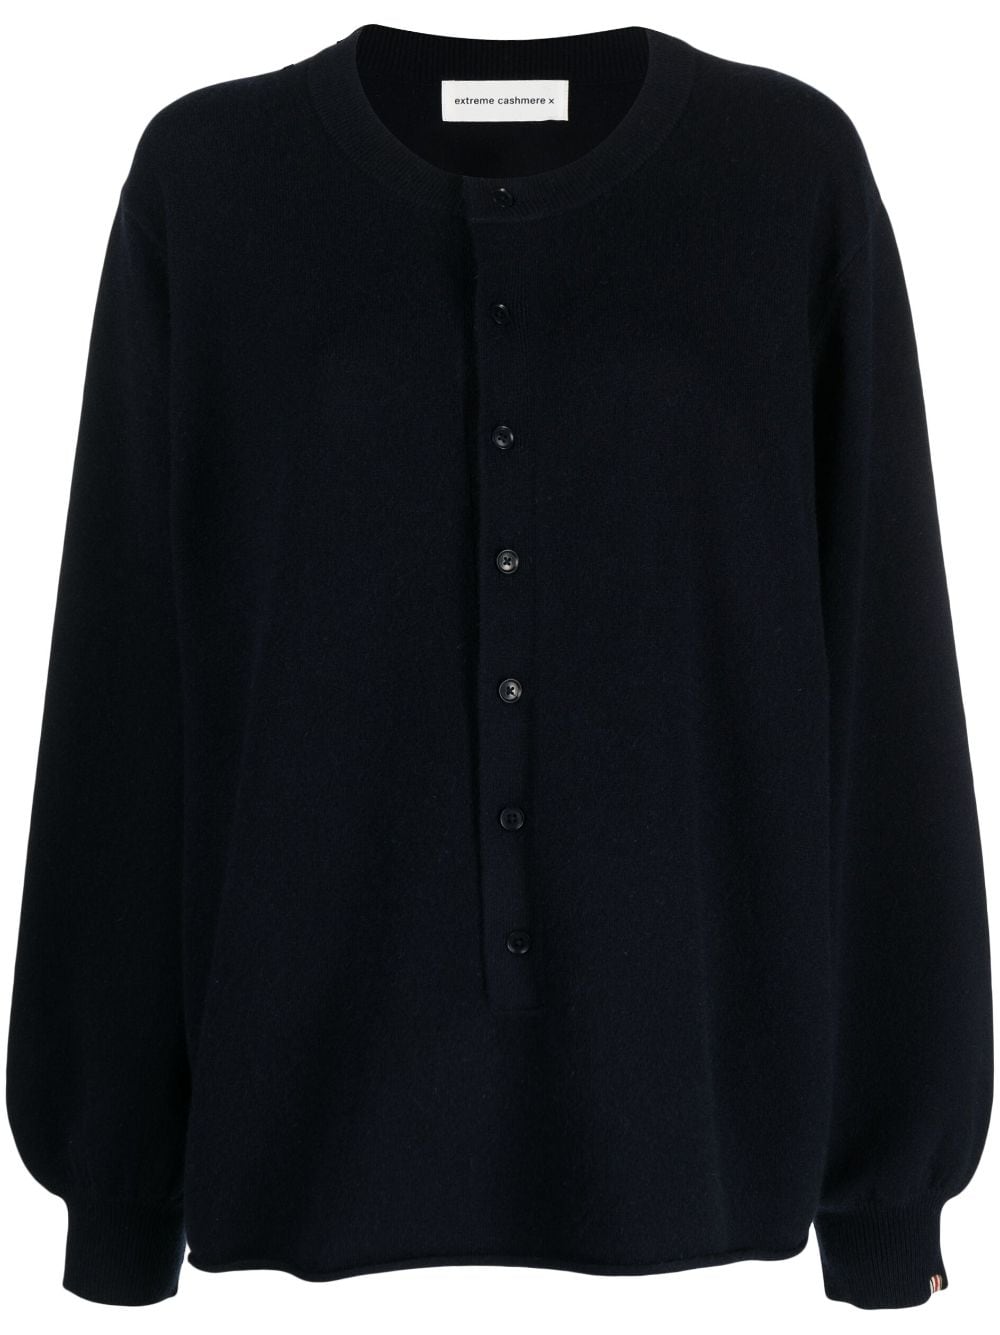 EXTREME CASHMERE CREW-NECK LONG-SLEEVE JUMPER